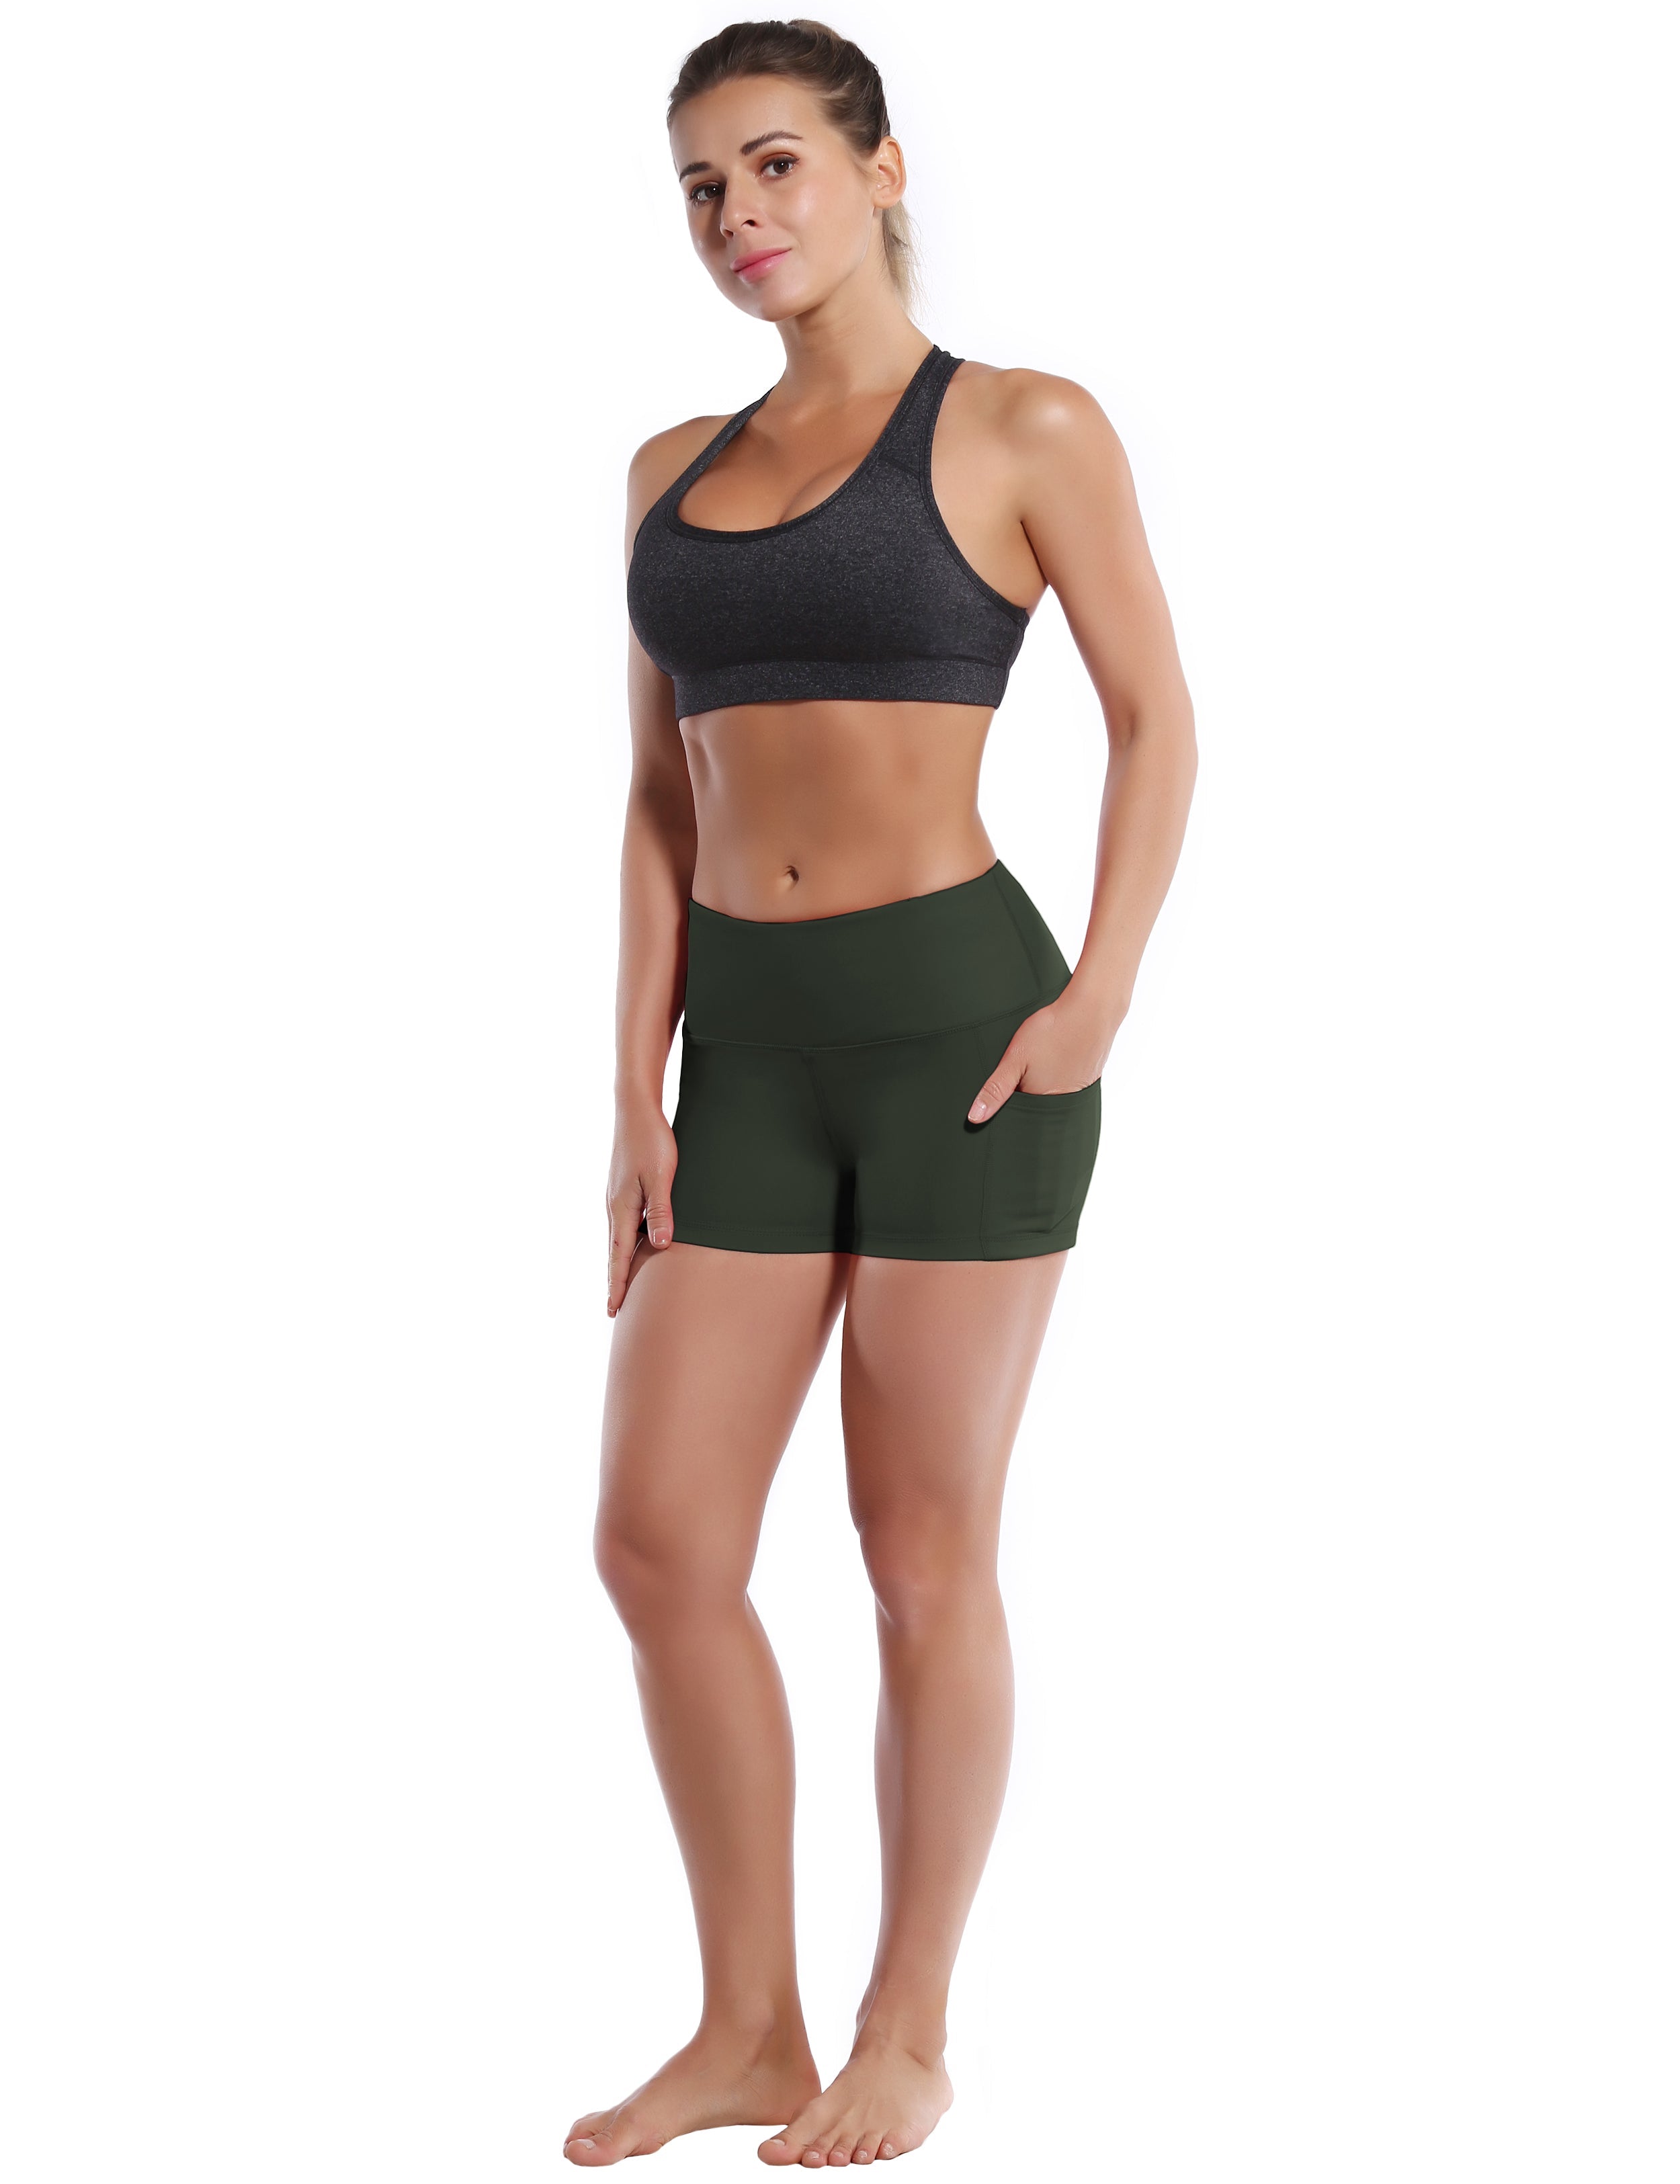 2.5" Side Pockets Pilates Shorts olivegray Sleek, soft, smooth and totally comfortable: our newest sexy style is here. Softest-ever fabric High elasticity High density 4-way stretch Fabric doesn't attract lint easily No see-through Moisture-wicking Machine wash 78% Polyester, 22% Spandex